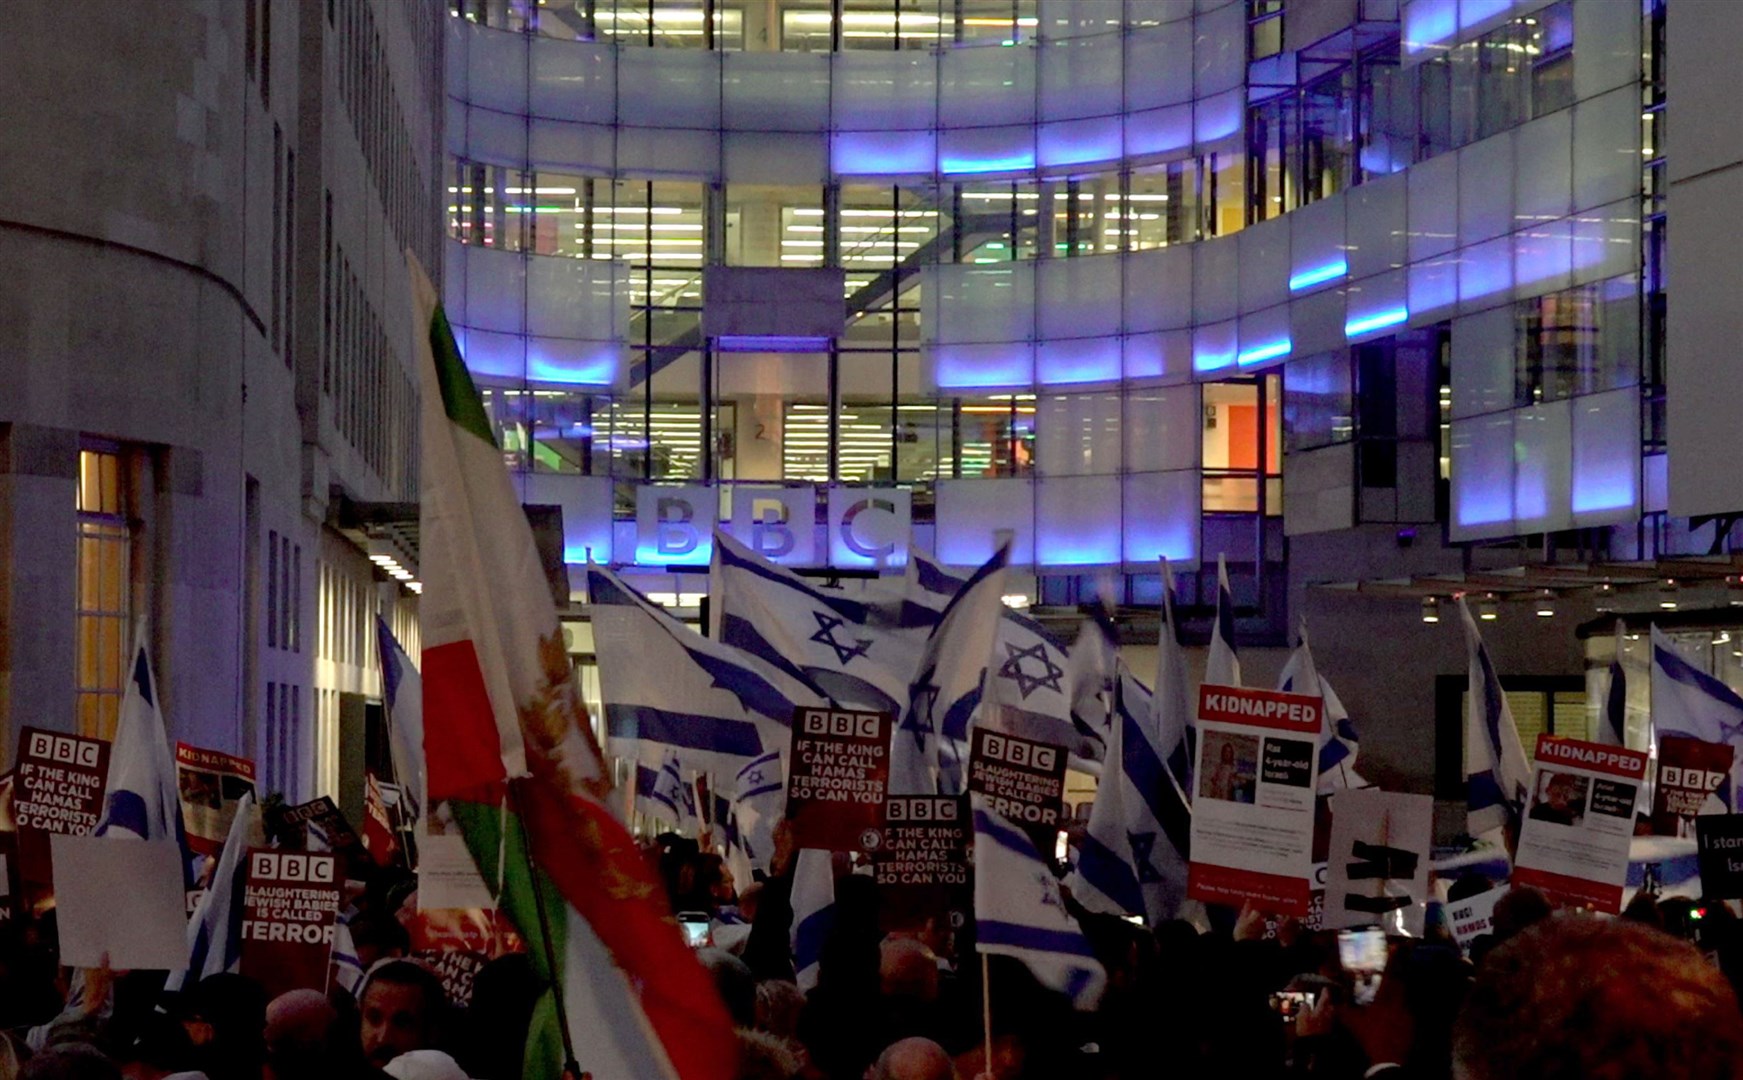 Protesters outside BBC Broadcasting House, London, calling for the BBC to change its stance on not labelling Hamas as terrorists (PA)